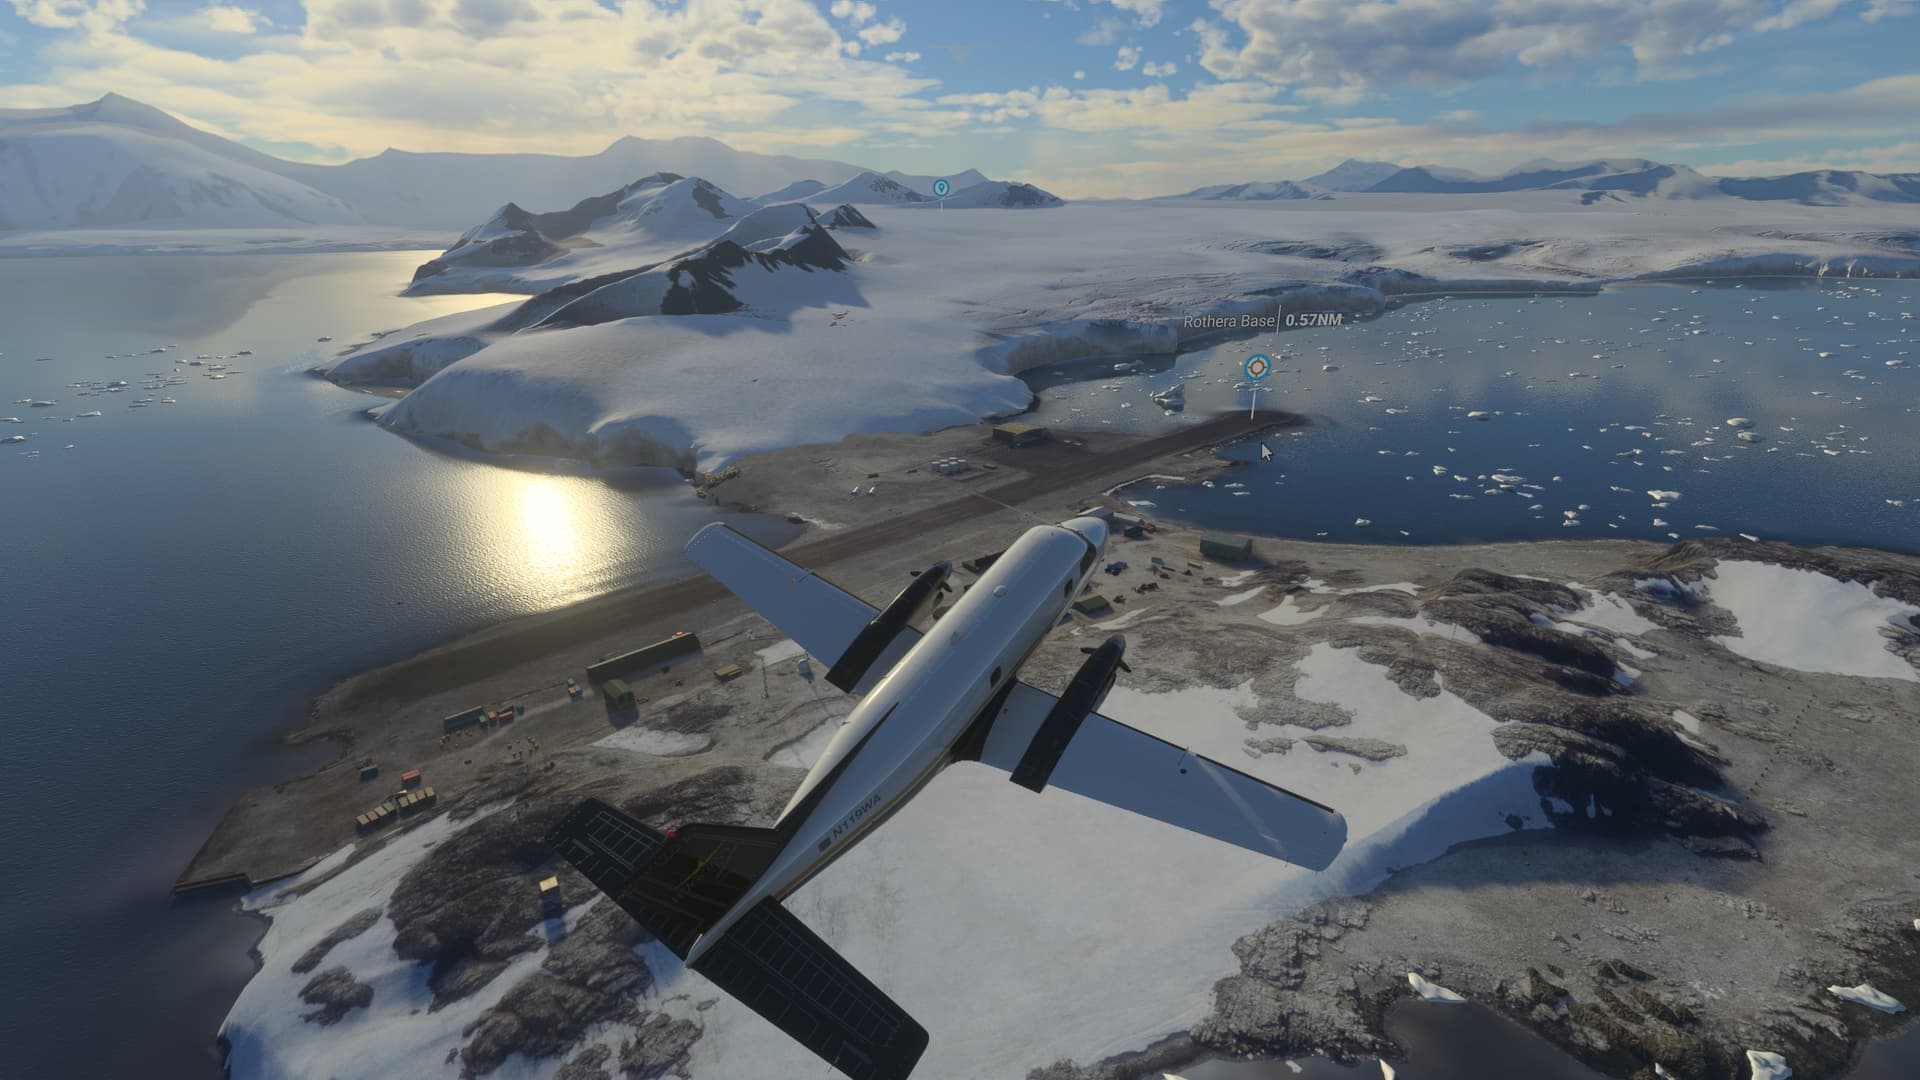 Microsoft Flight Simulator Update 13 takes you to Antarctica and